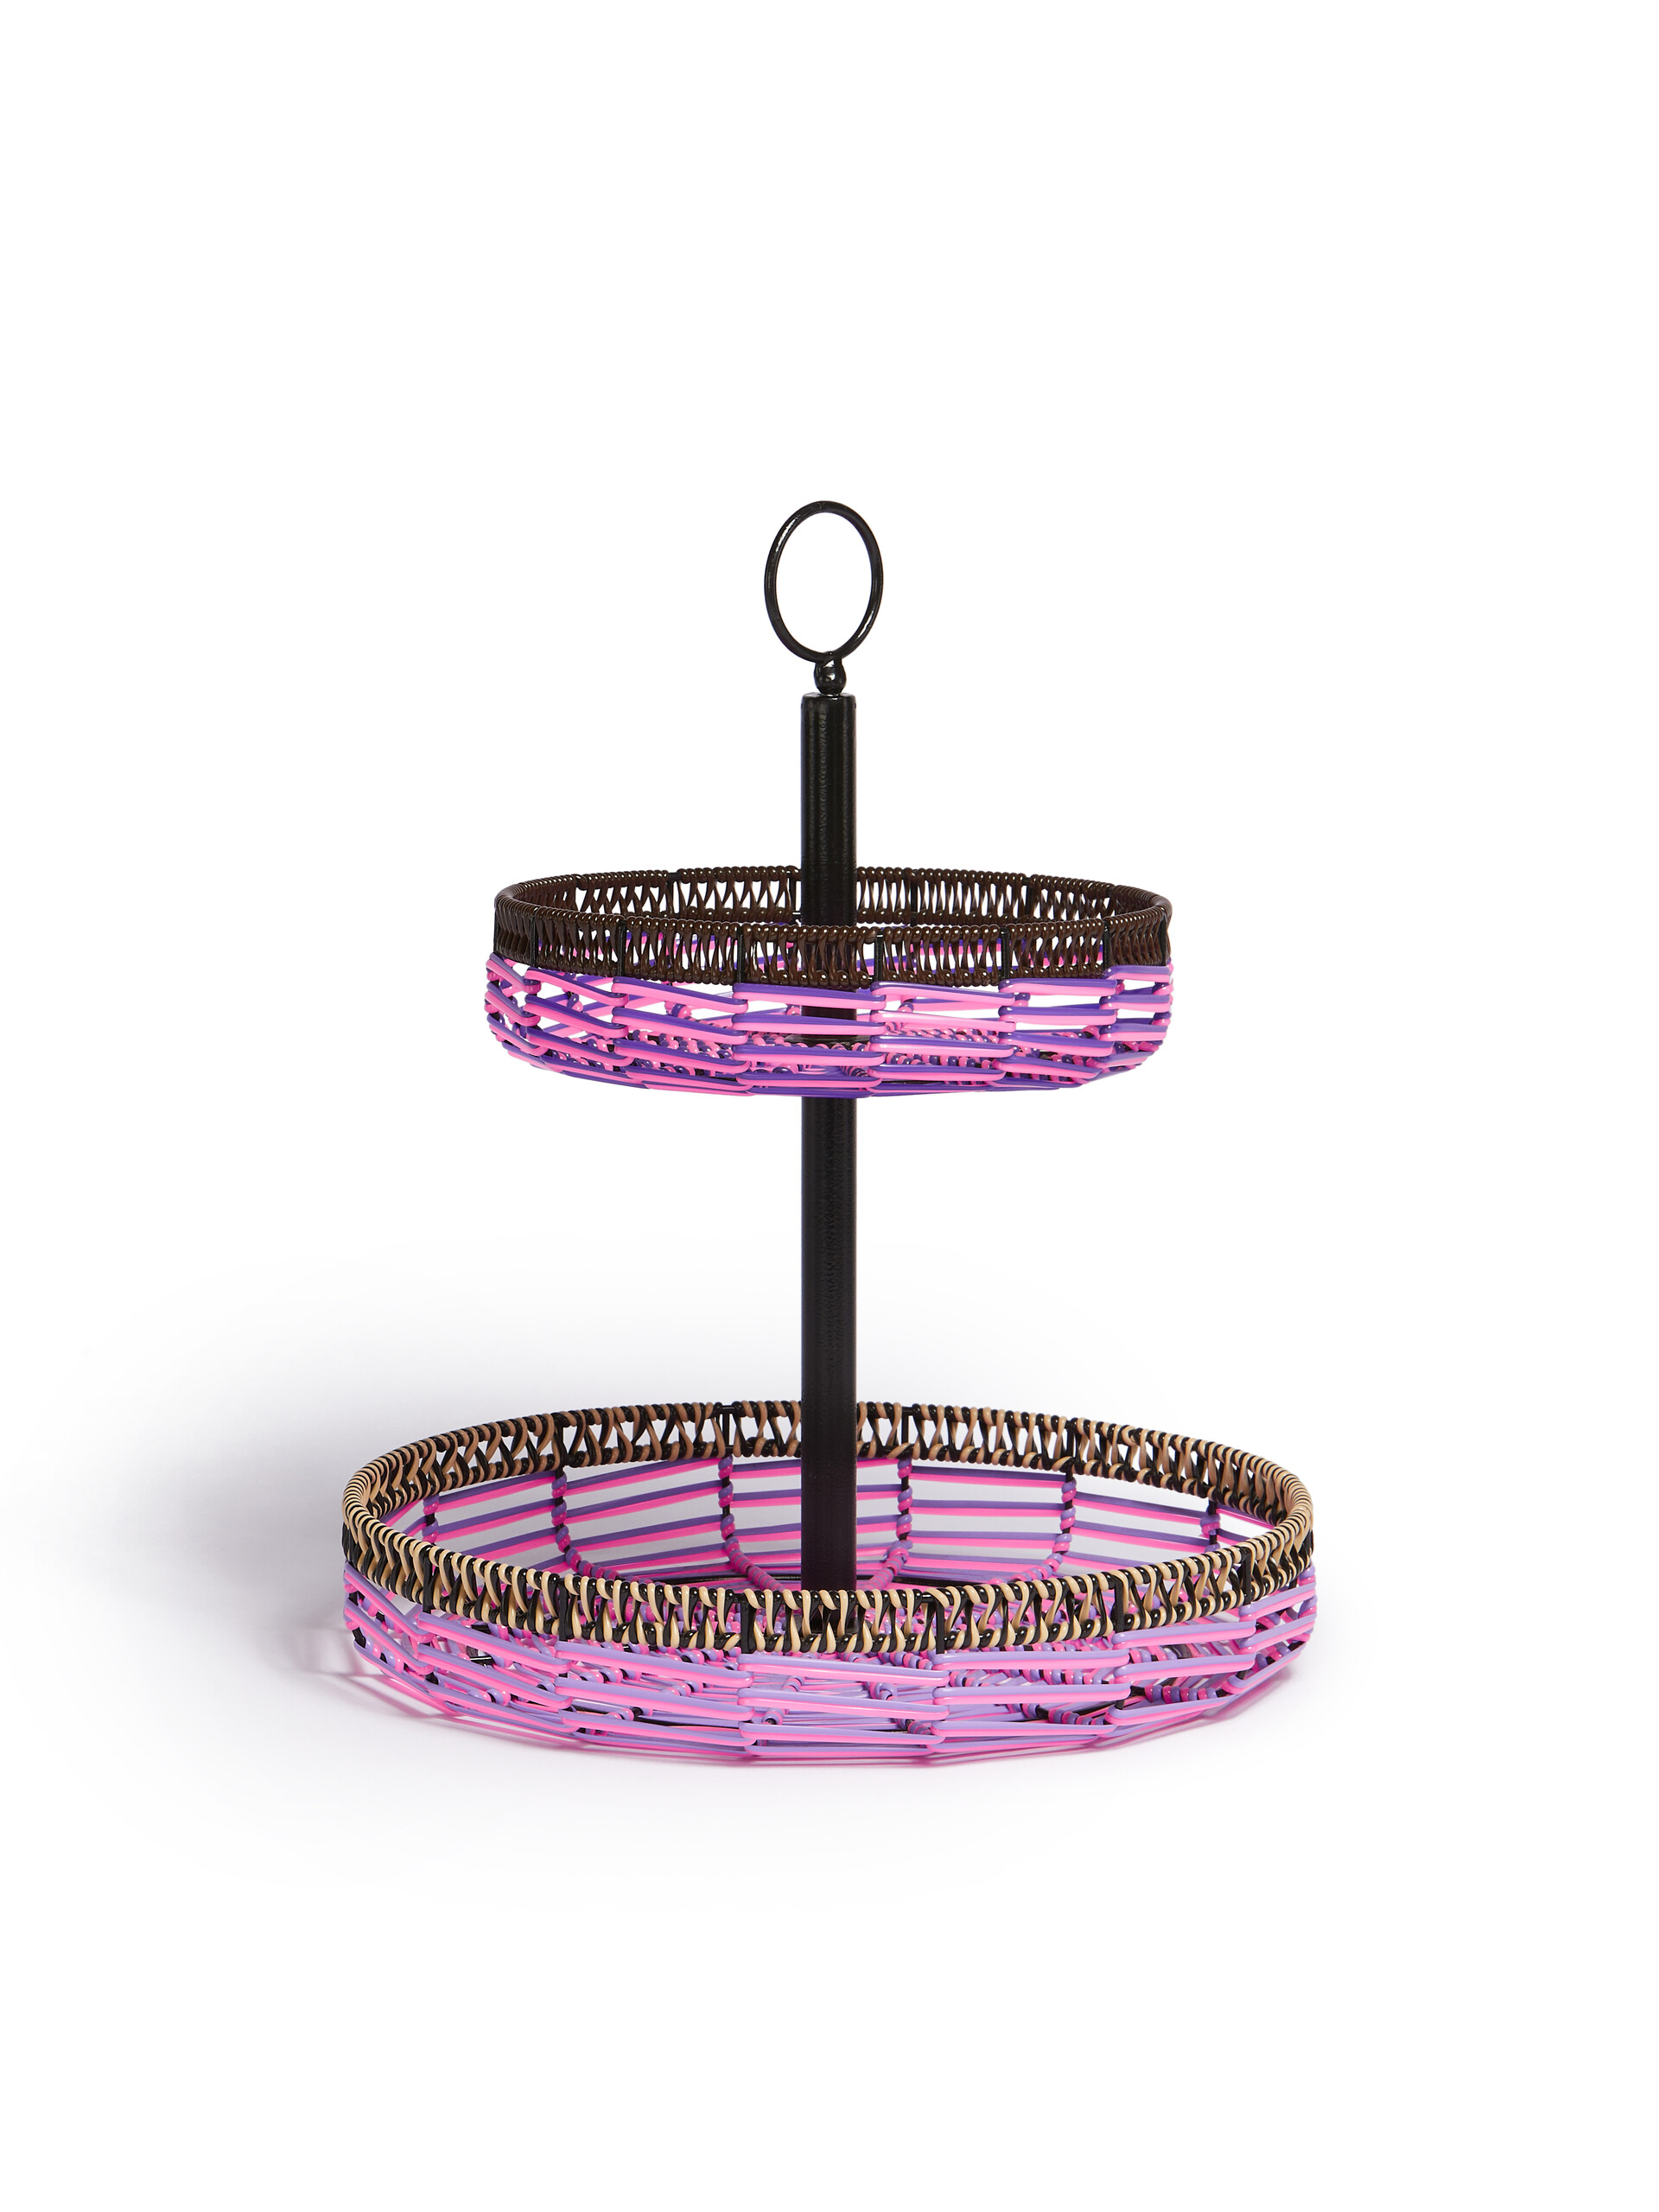 Pink MARNI MARKET two-tier woven cable fruit stand - Accessories - Image 2